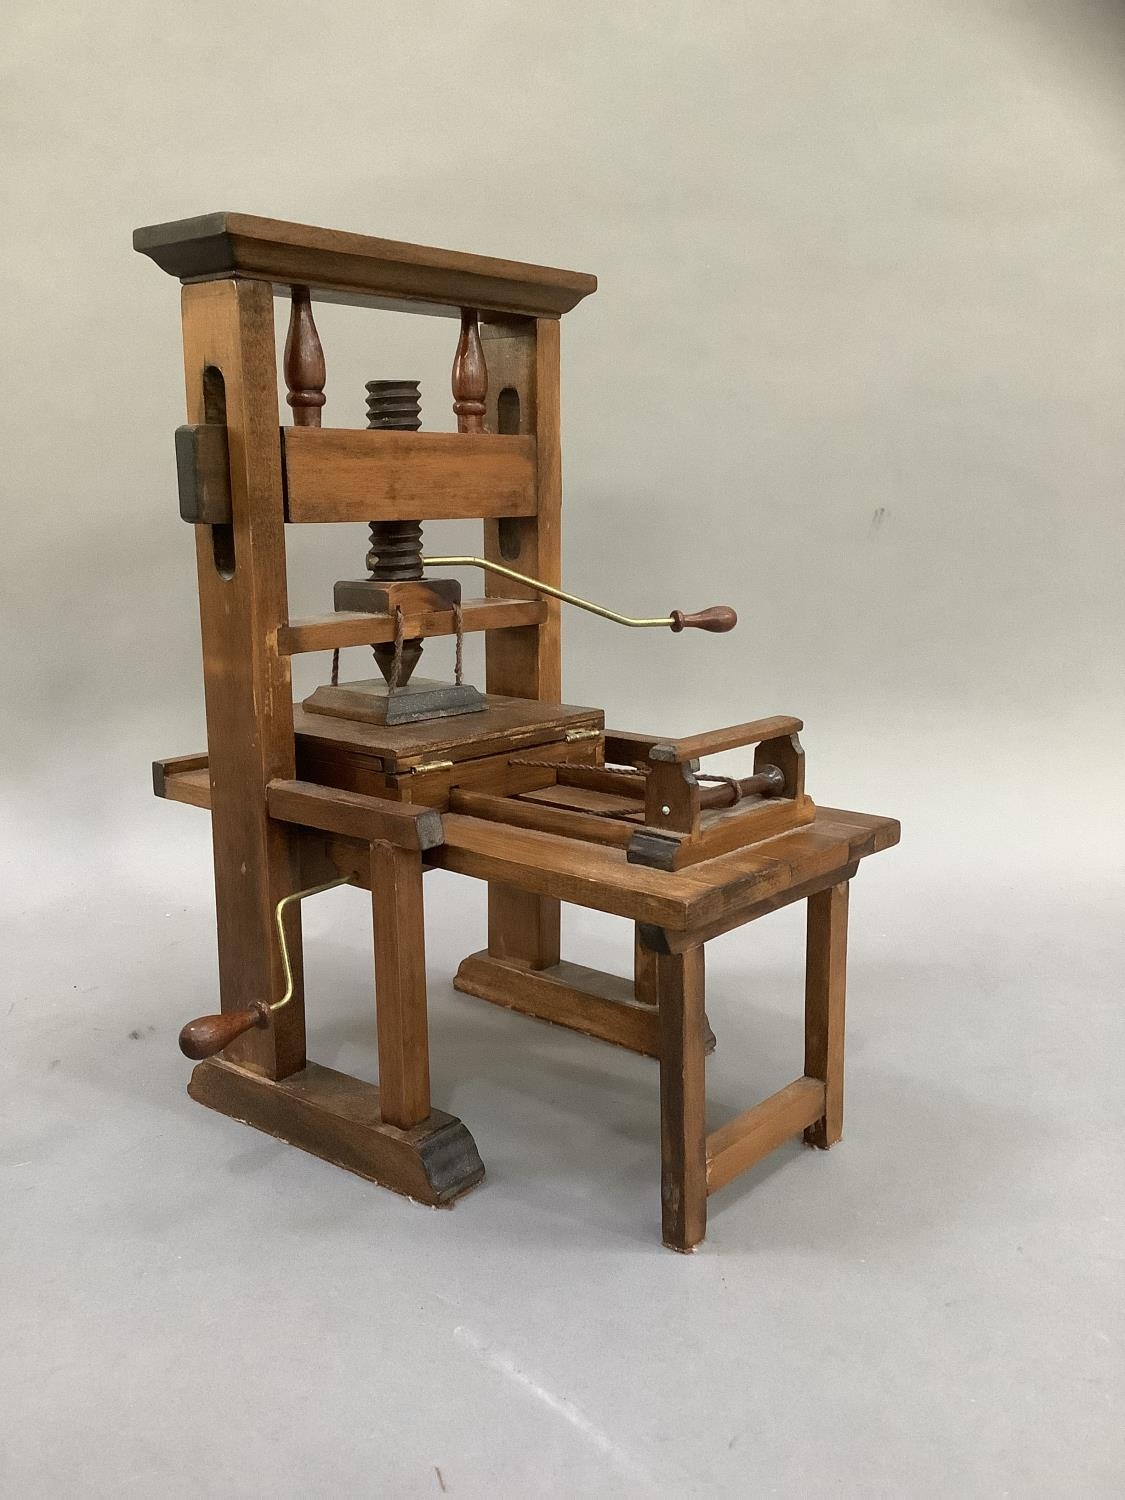 A model printing press and a spinning wheel - Image 2 of 3